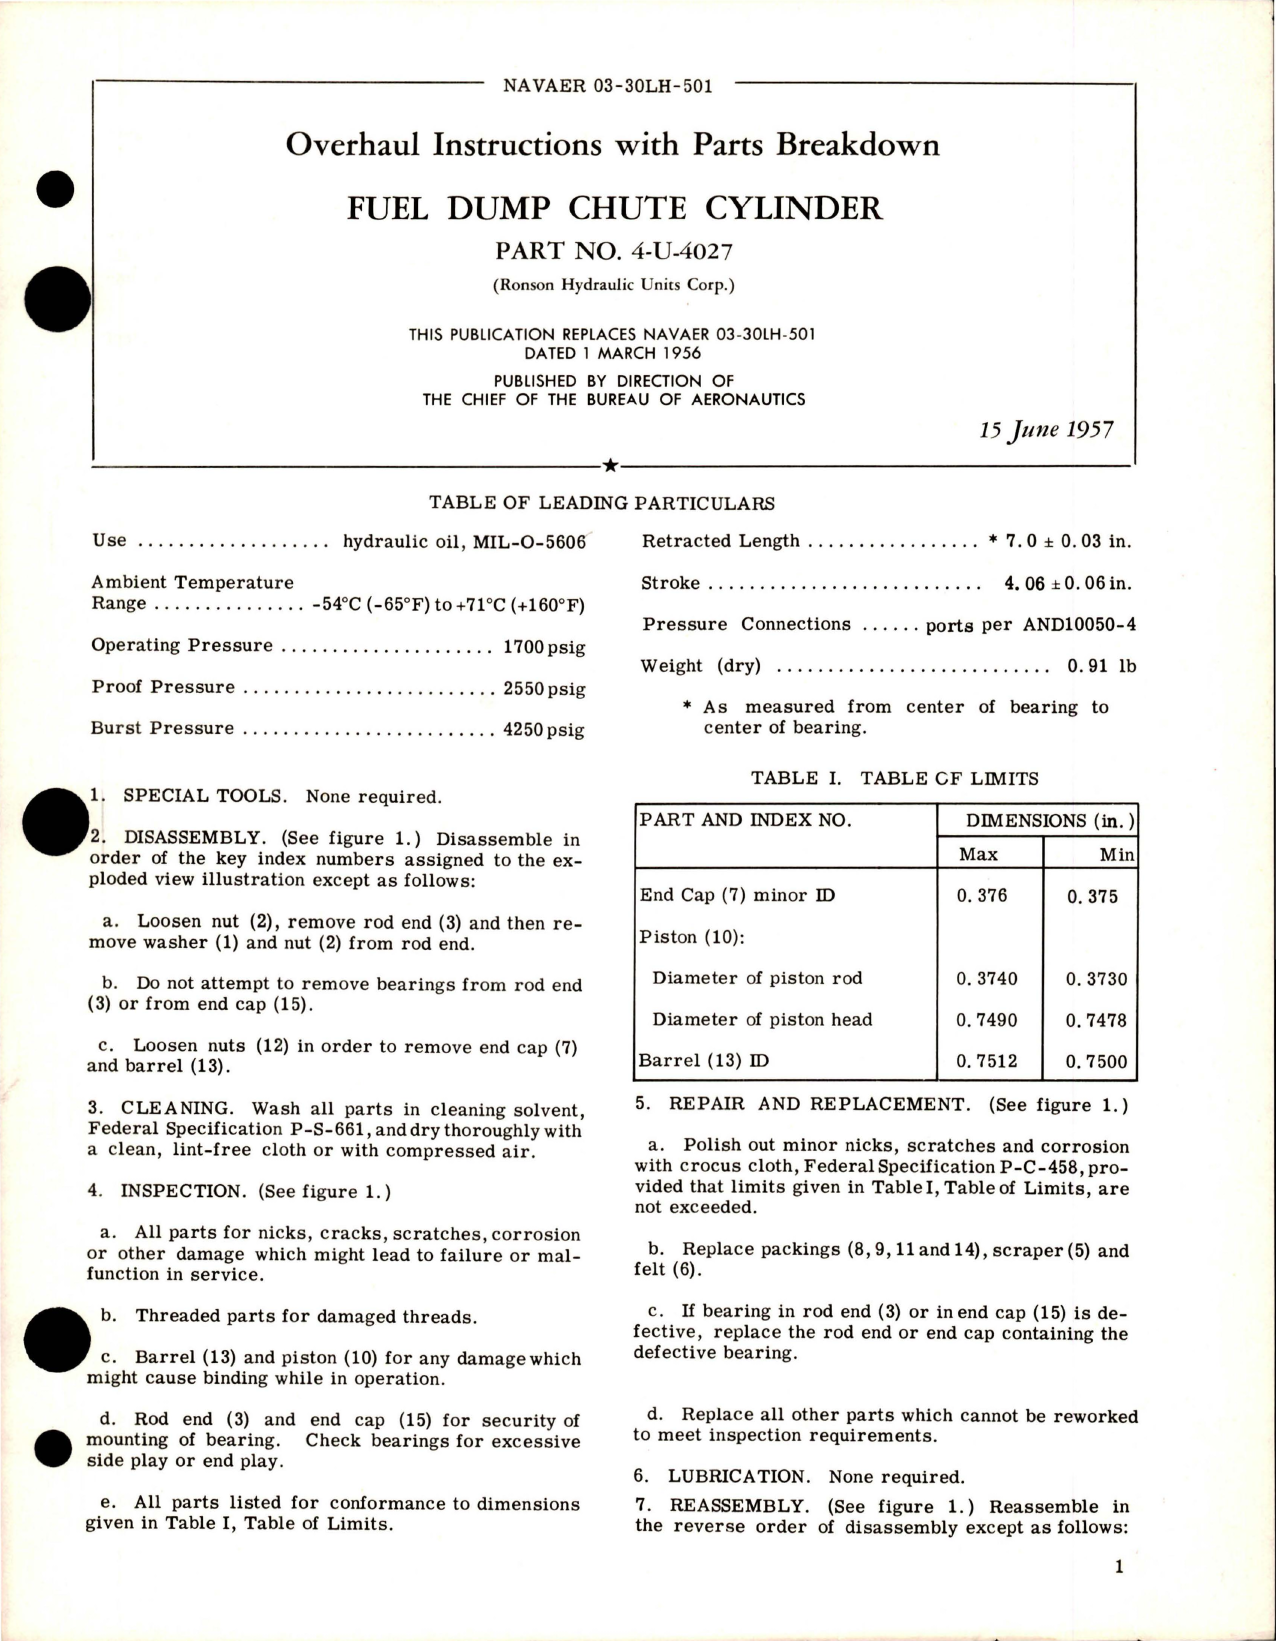 Sample page 1 from AirCorps Library document: Overhaul Instructions with Parts for Fuel Dump Chute Cylinder - Part 4-U-4027